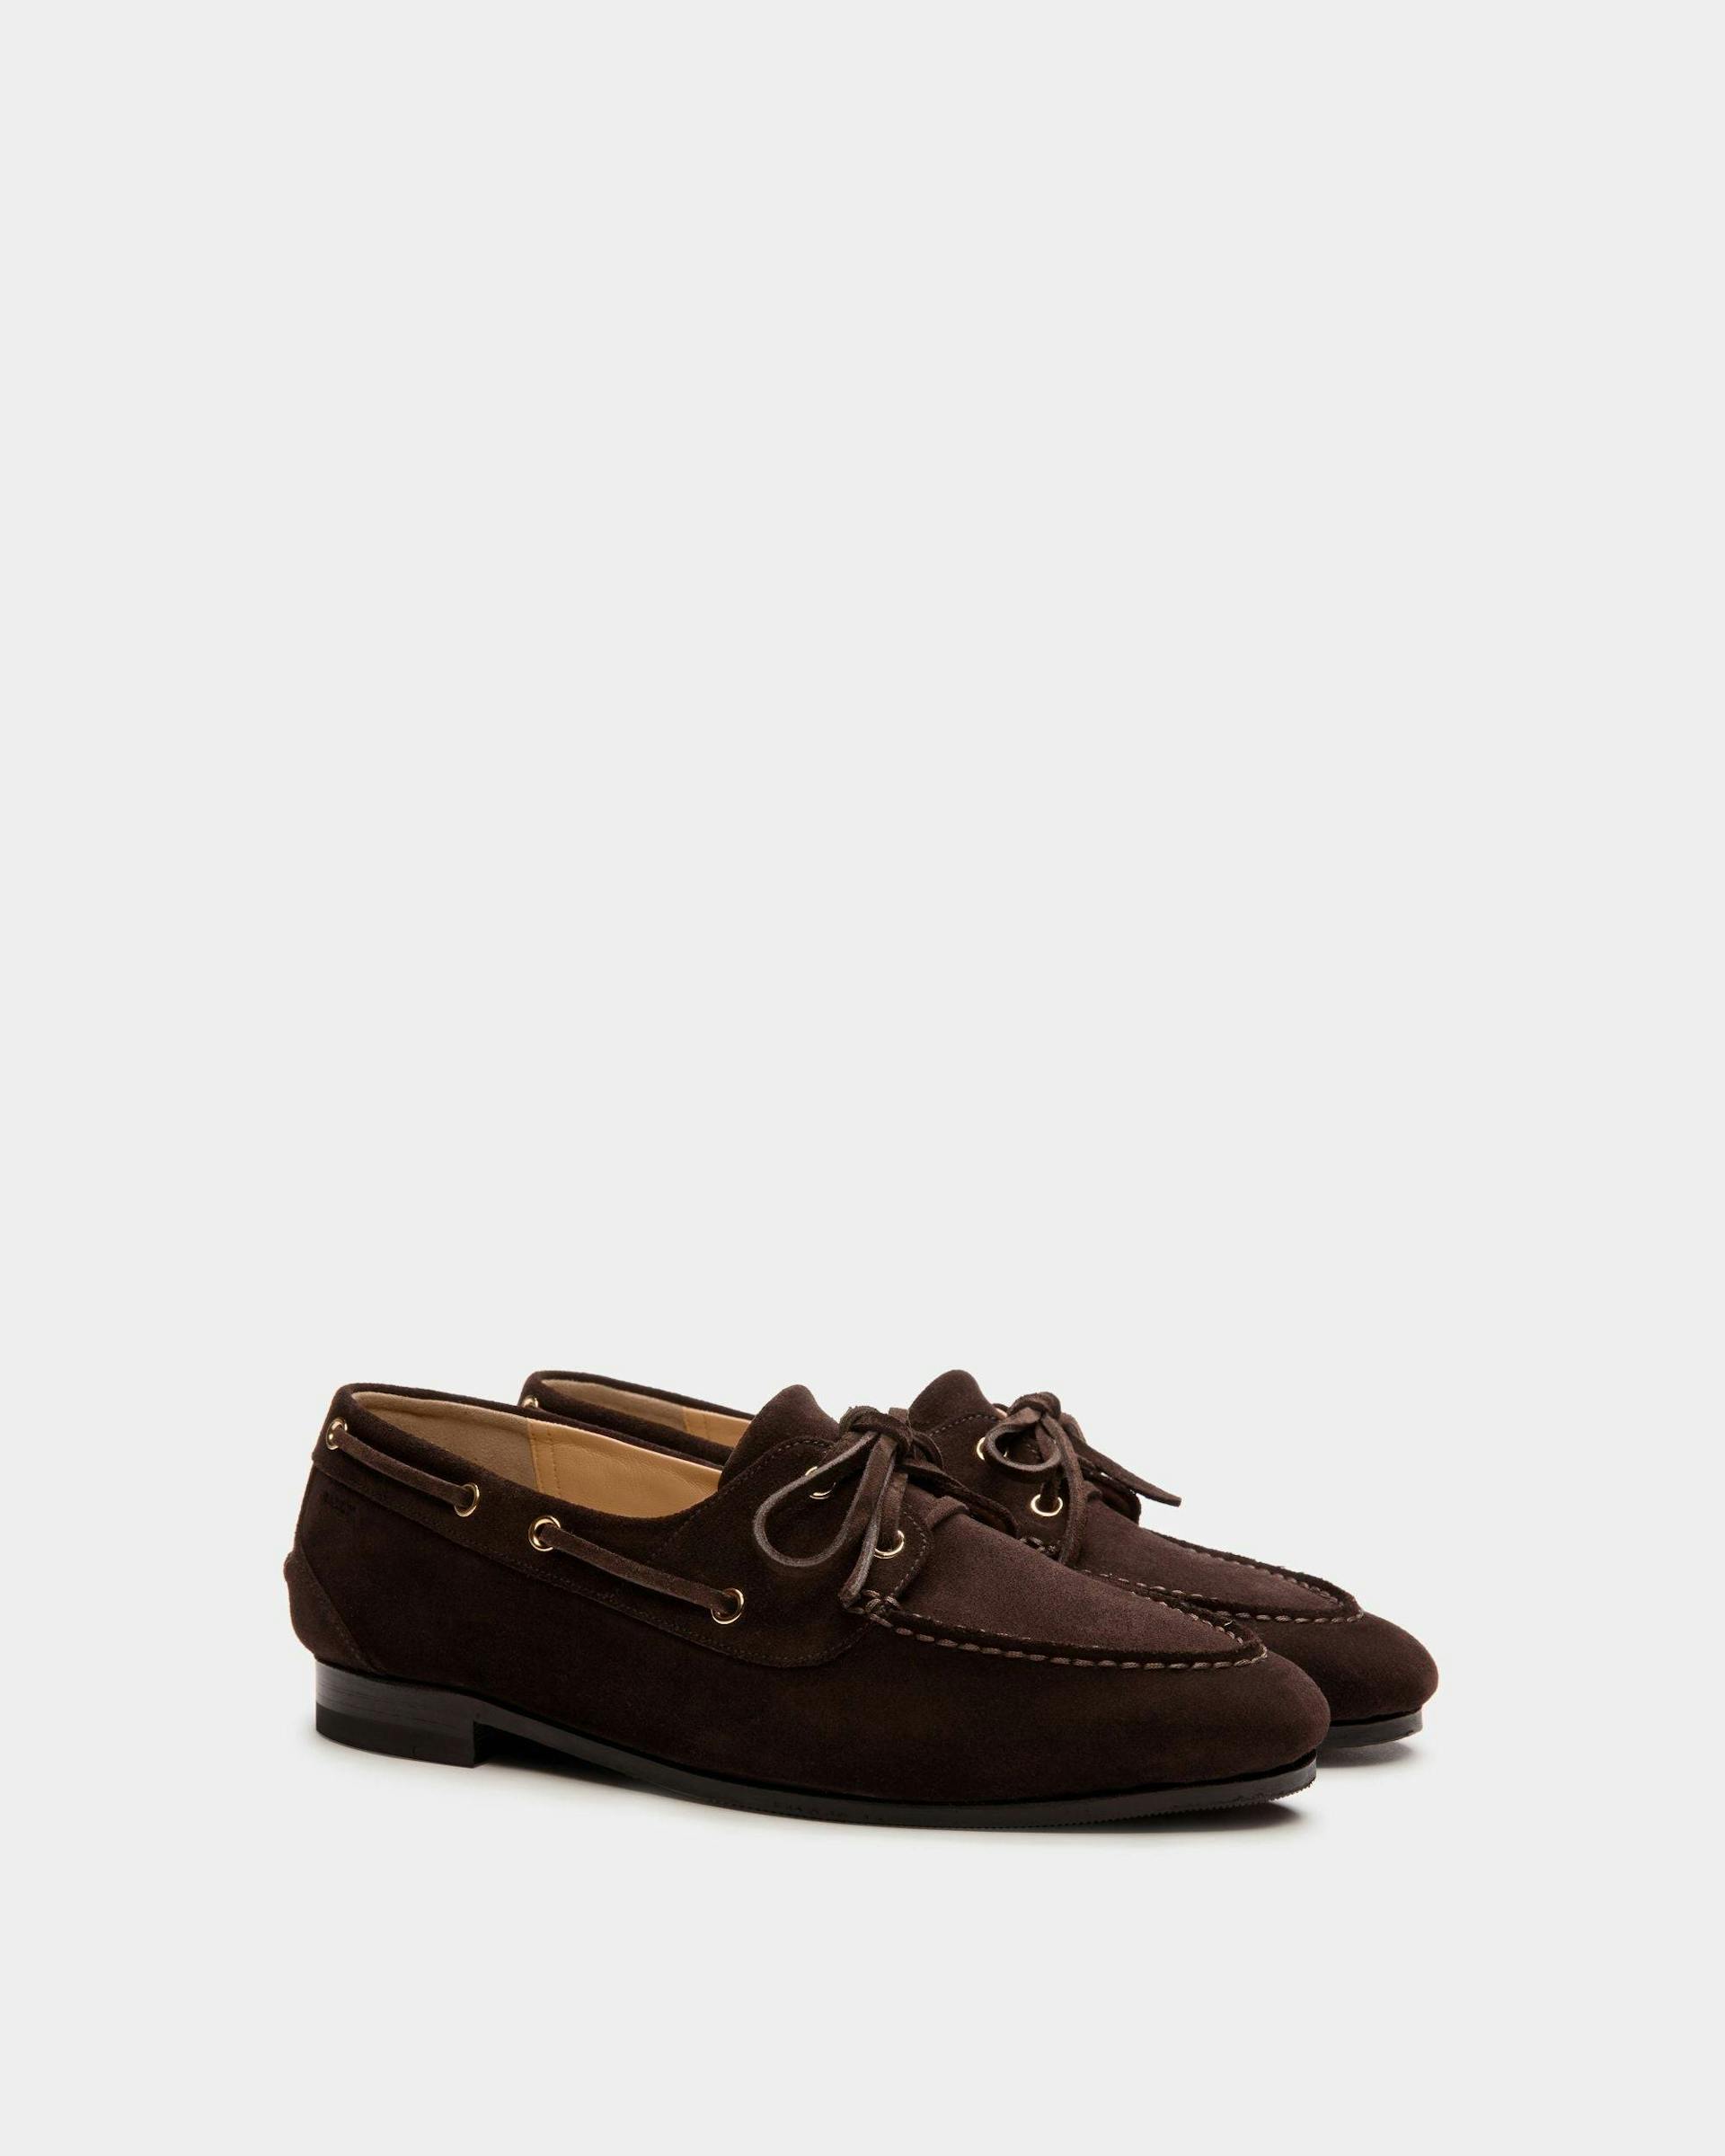 Women's Plume Moccasin in Dark Brown Suede | Bally | Still Life 3/4 Front